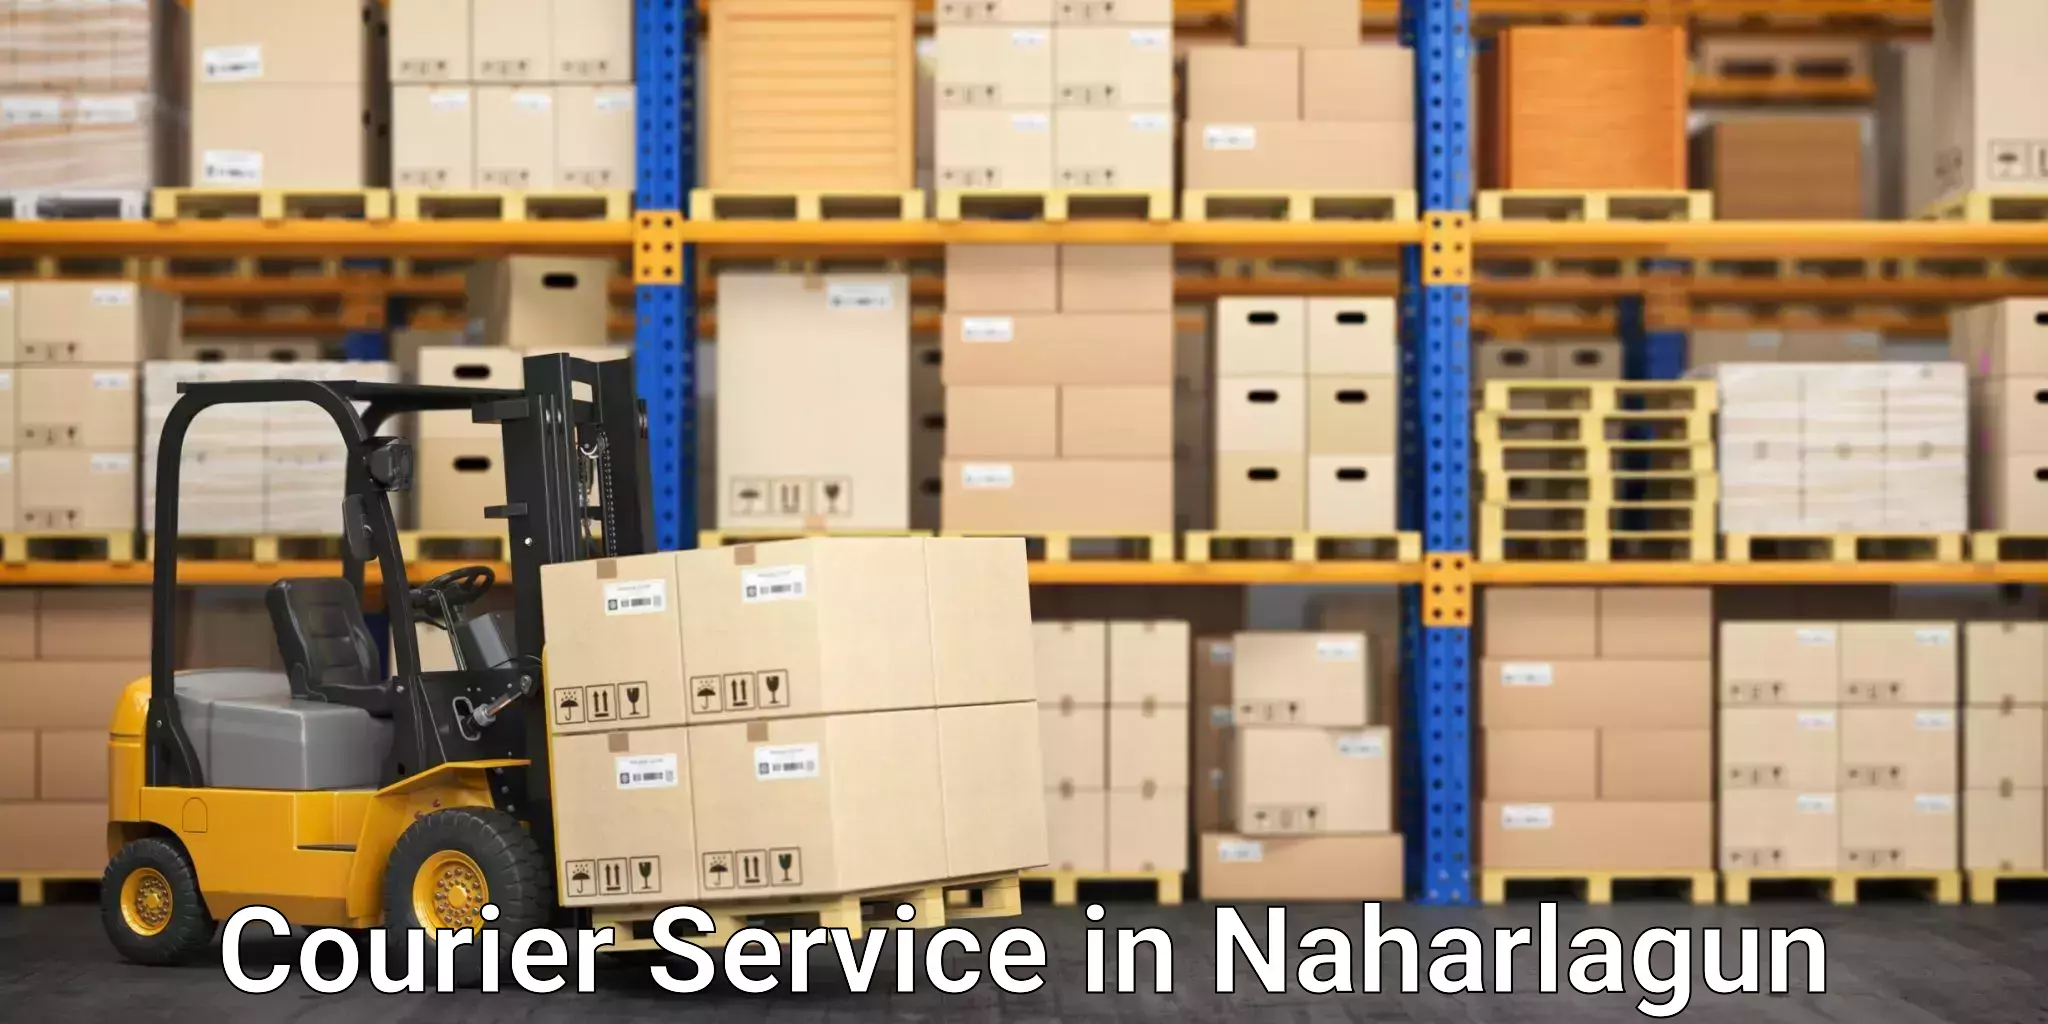 Competitive shipping rates in Naharlagun